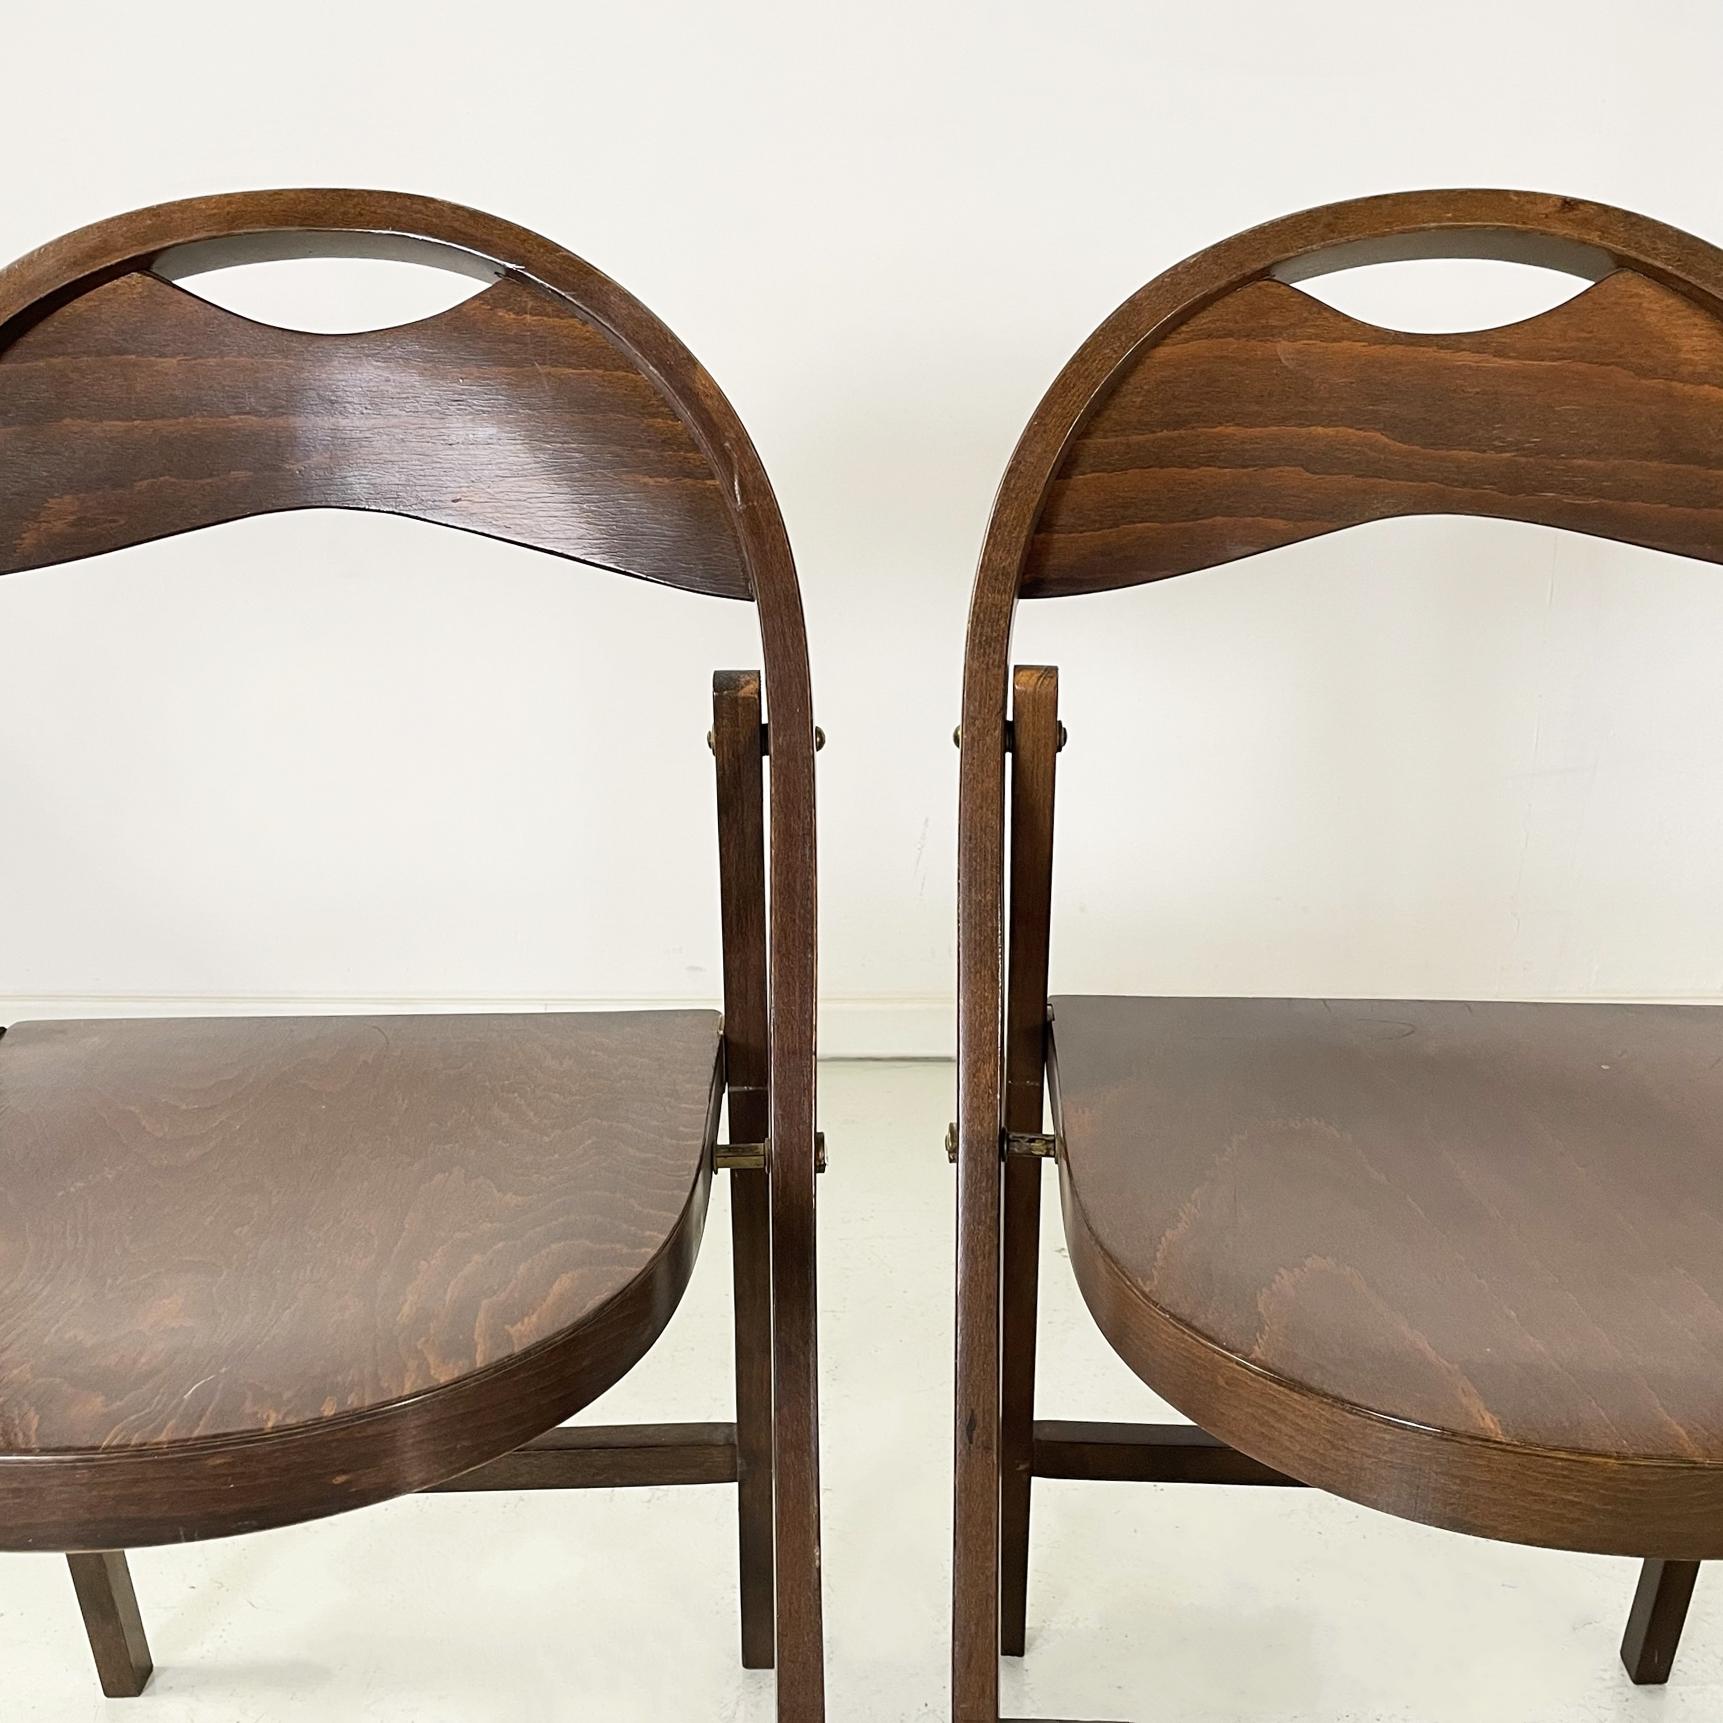 Italian Midcentury Wooden Folding Chairs Tric by Castiglioni, 1960s 1